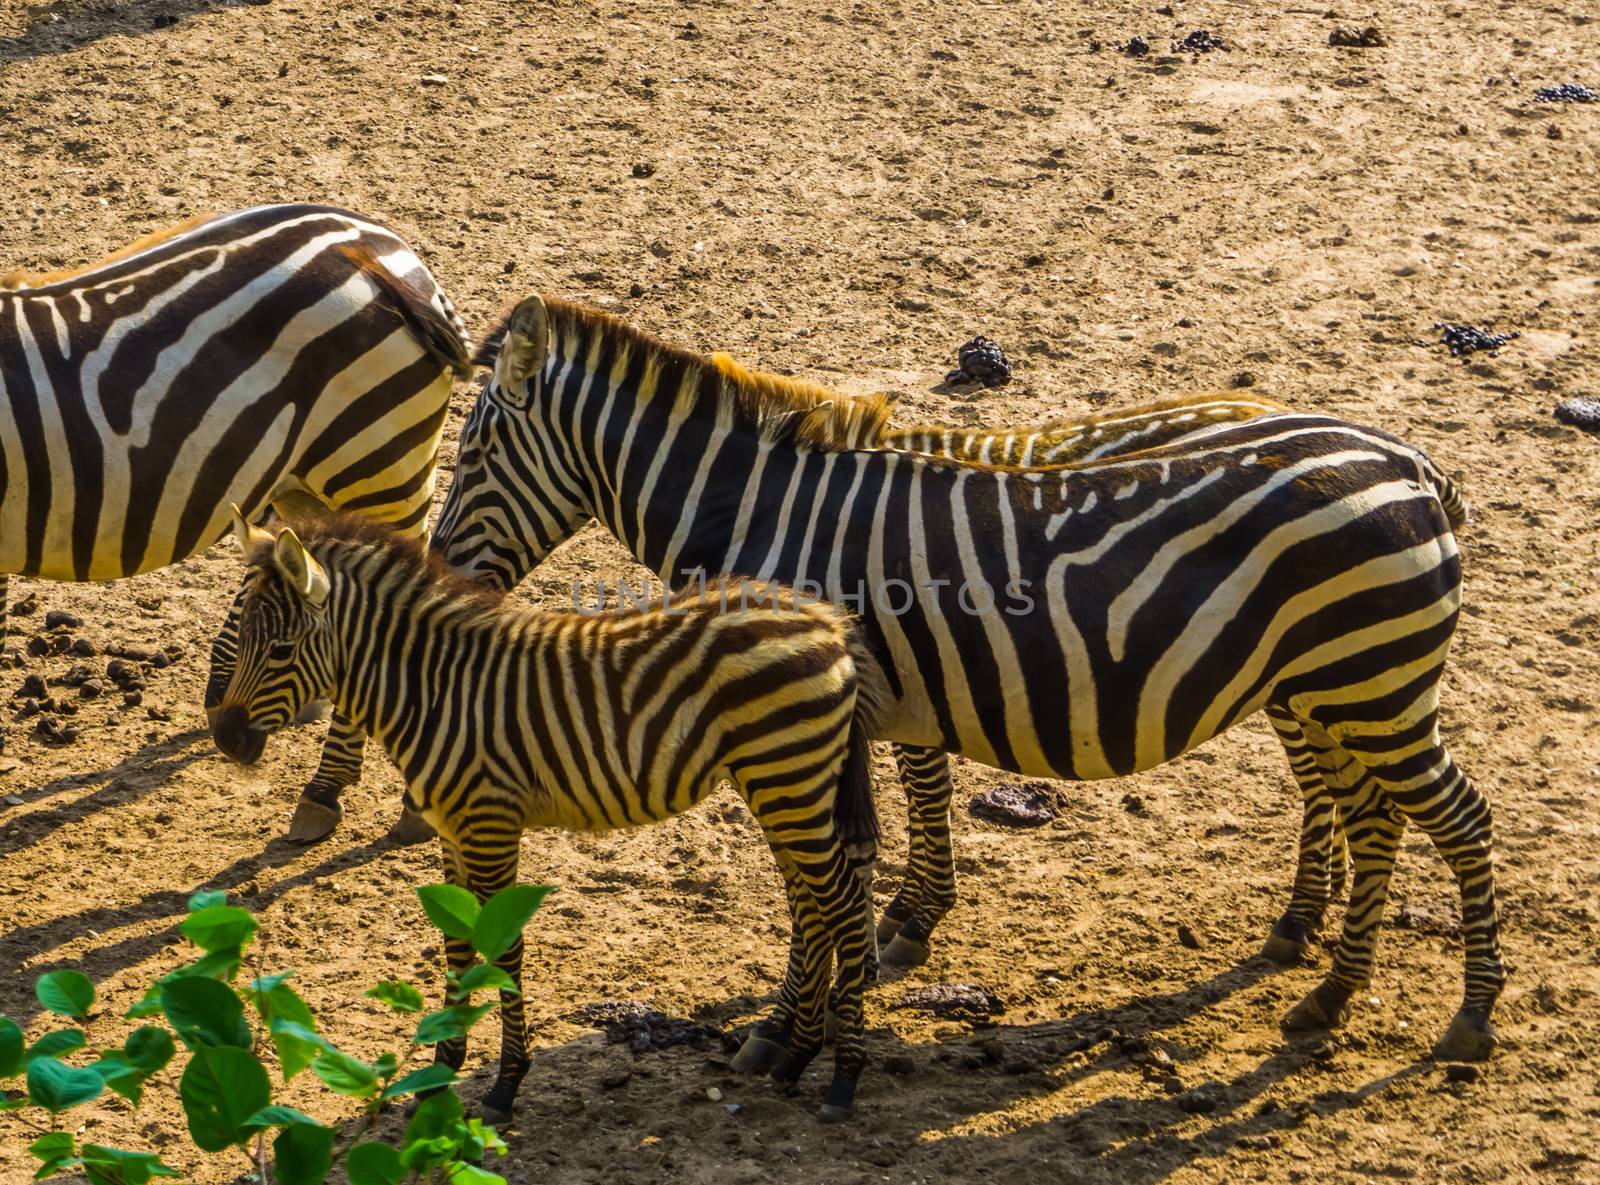 grant's zebra foal with its mother, tropical wild horse specie from Africa by charlottebleijenberg